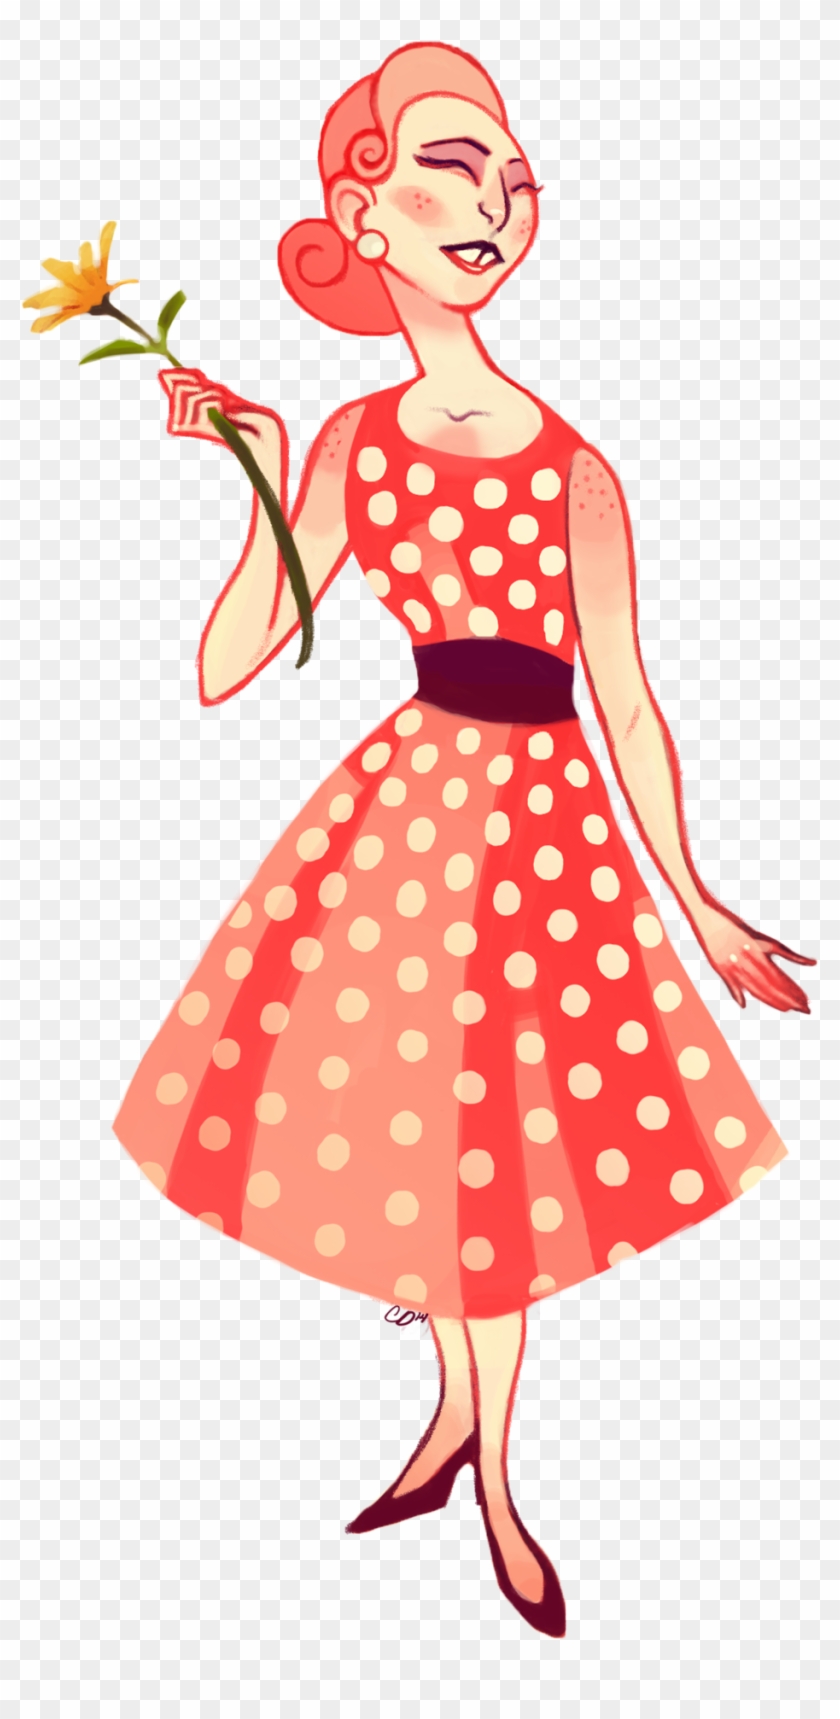 Original Characters Based Off Of A Caddy Vintage Housewive - Polka Dot #1174088